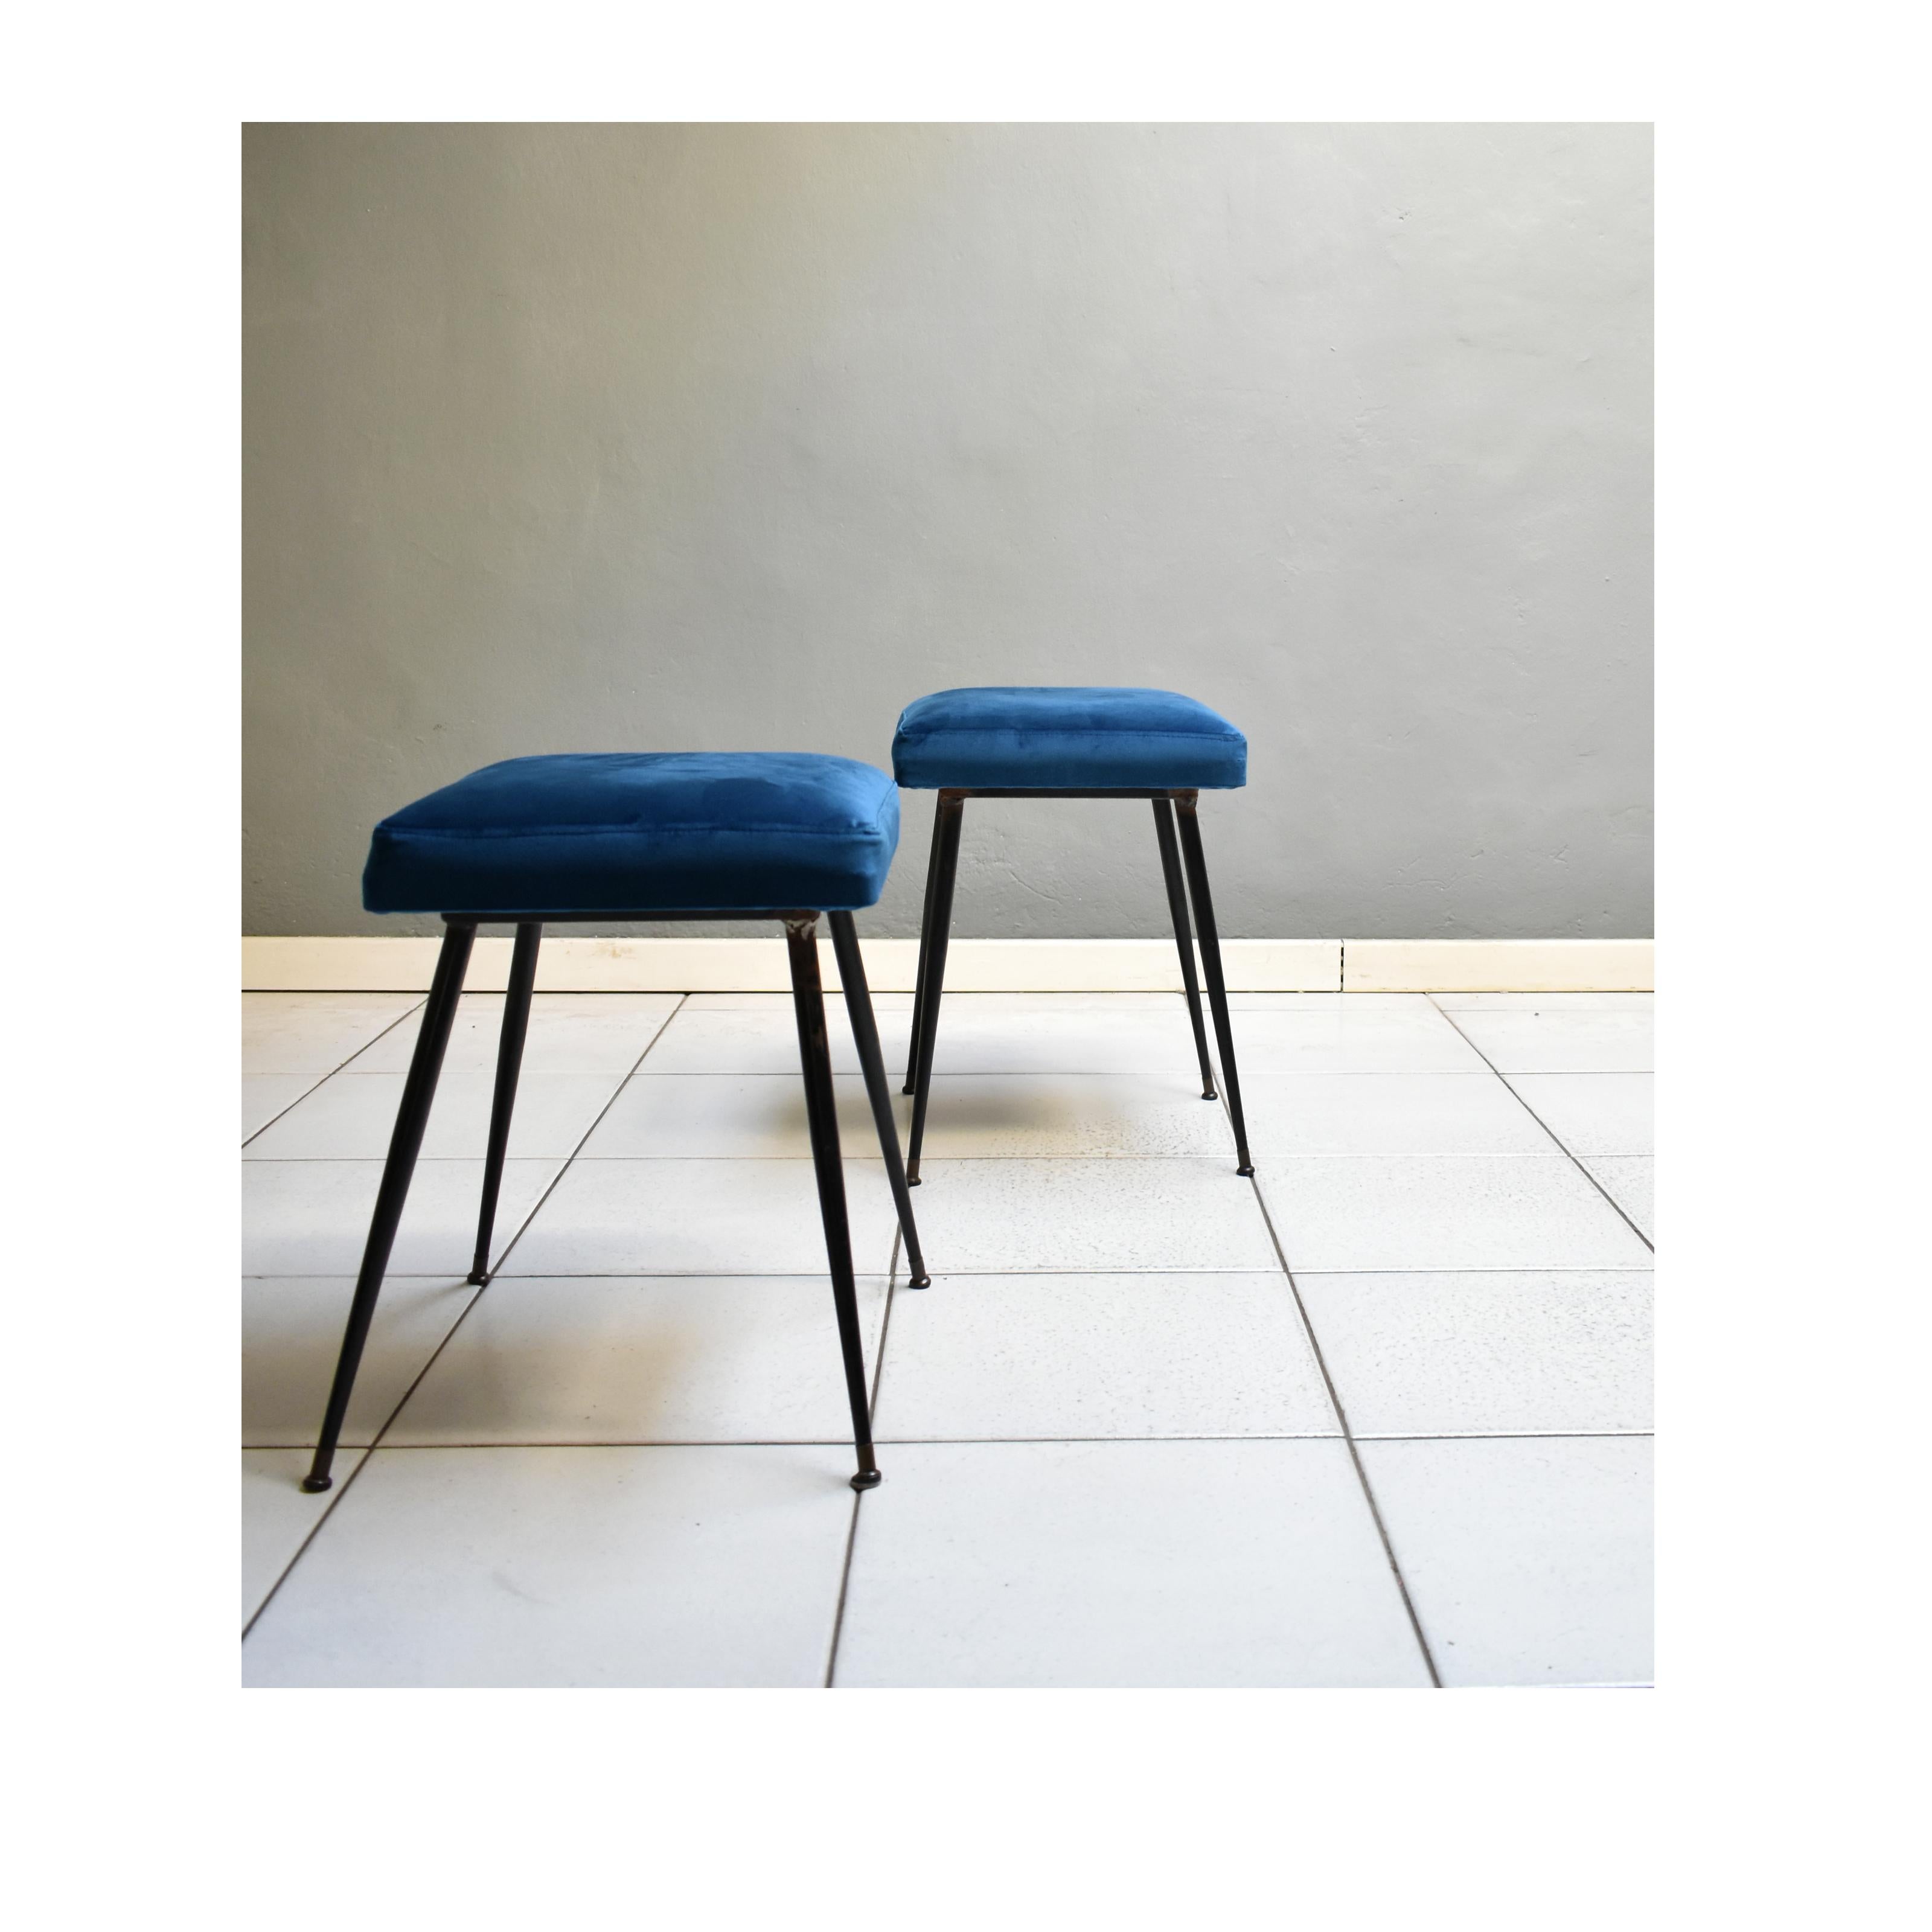 Set of two poufs, 1960s vinatge stools, brass feet and petroleum blue velvet upholstery.
Pair of vintage poufs from the 1960s, Italian manufacture.
The poufs have a black iron structure with brass feet, petroleum velvet footrest.

Dimensions
H